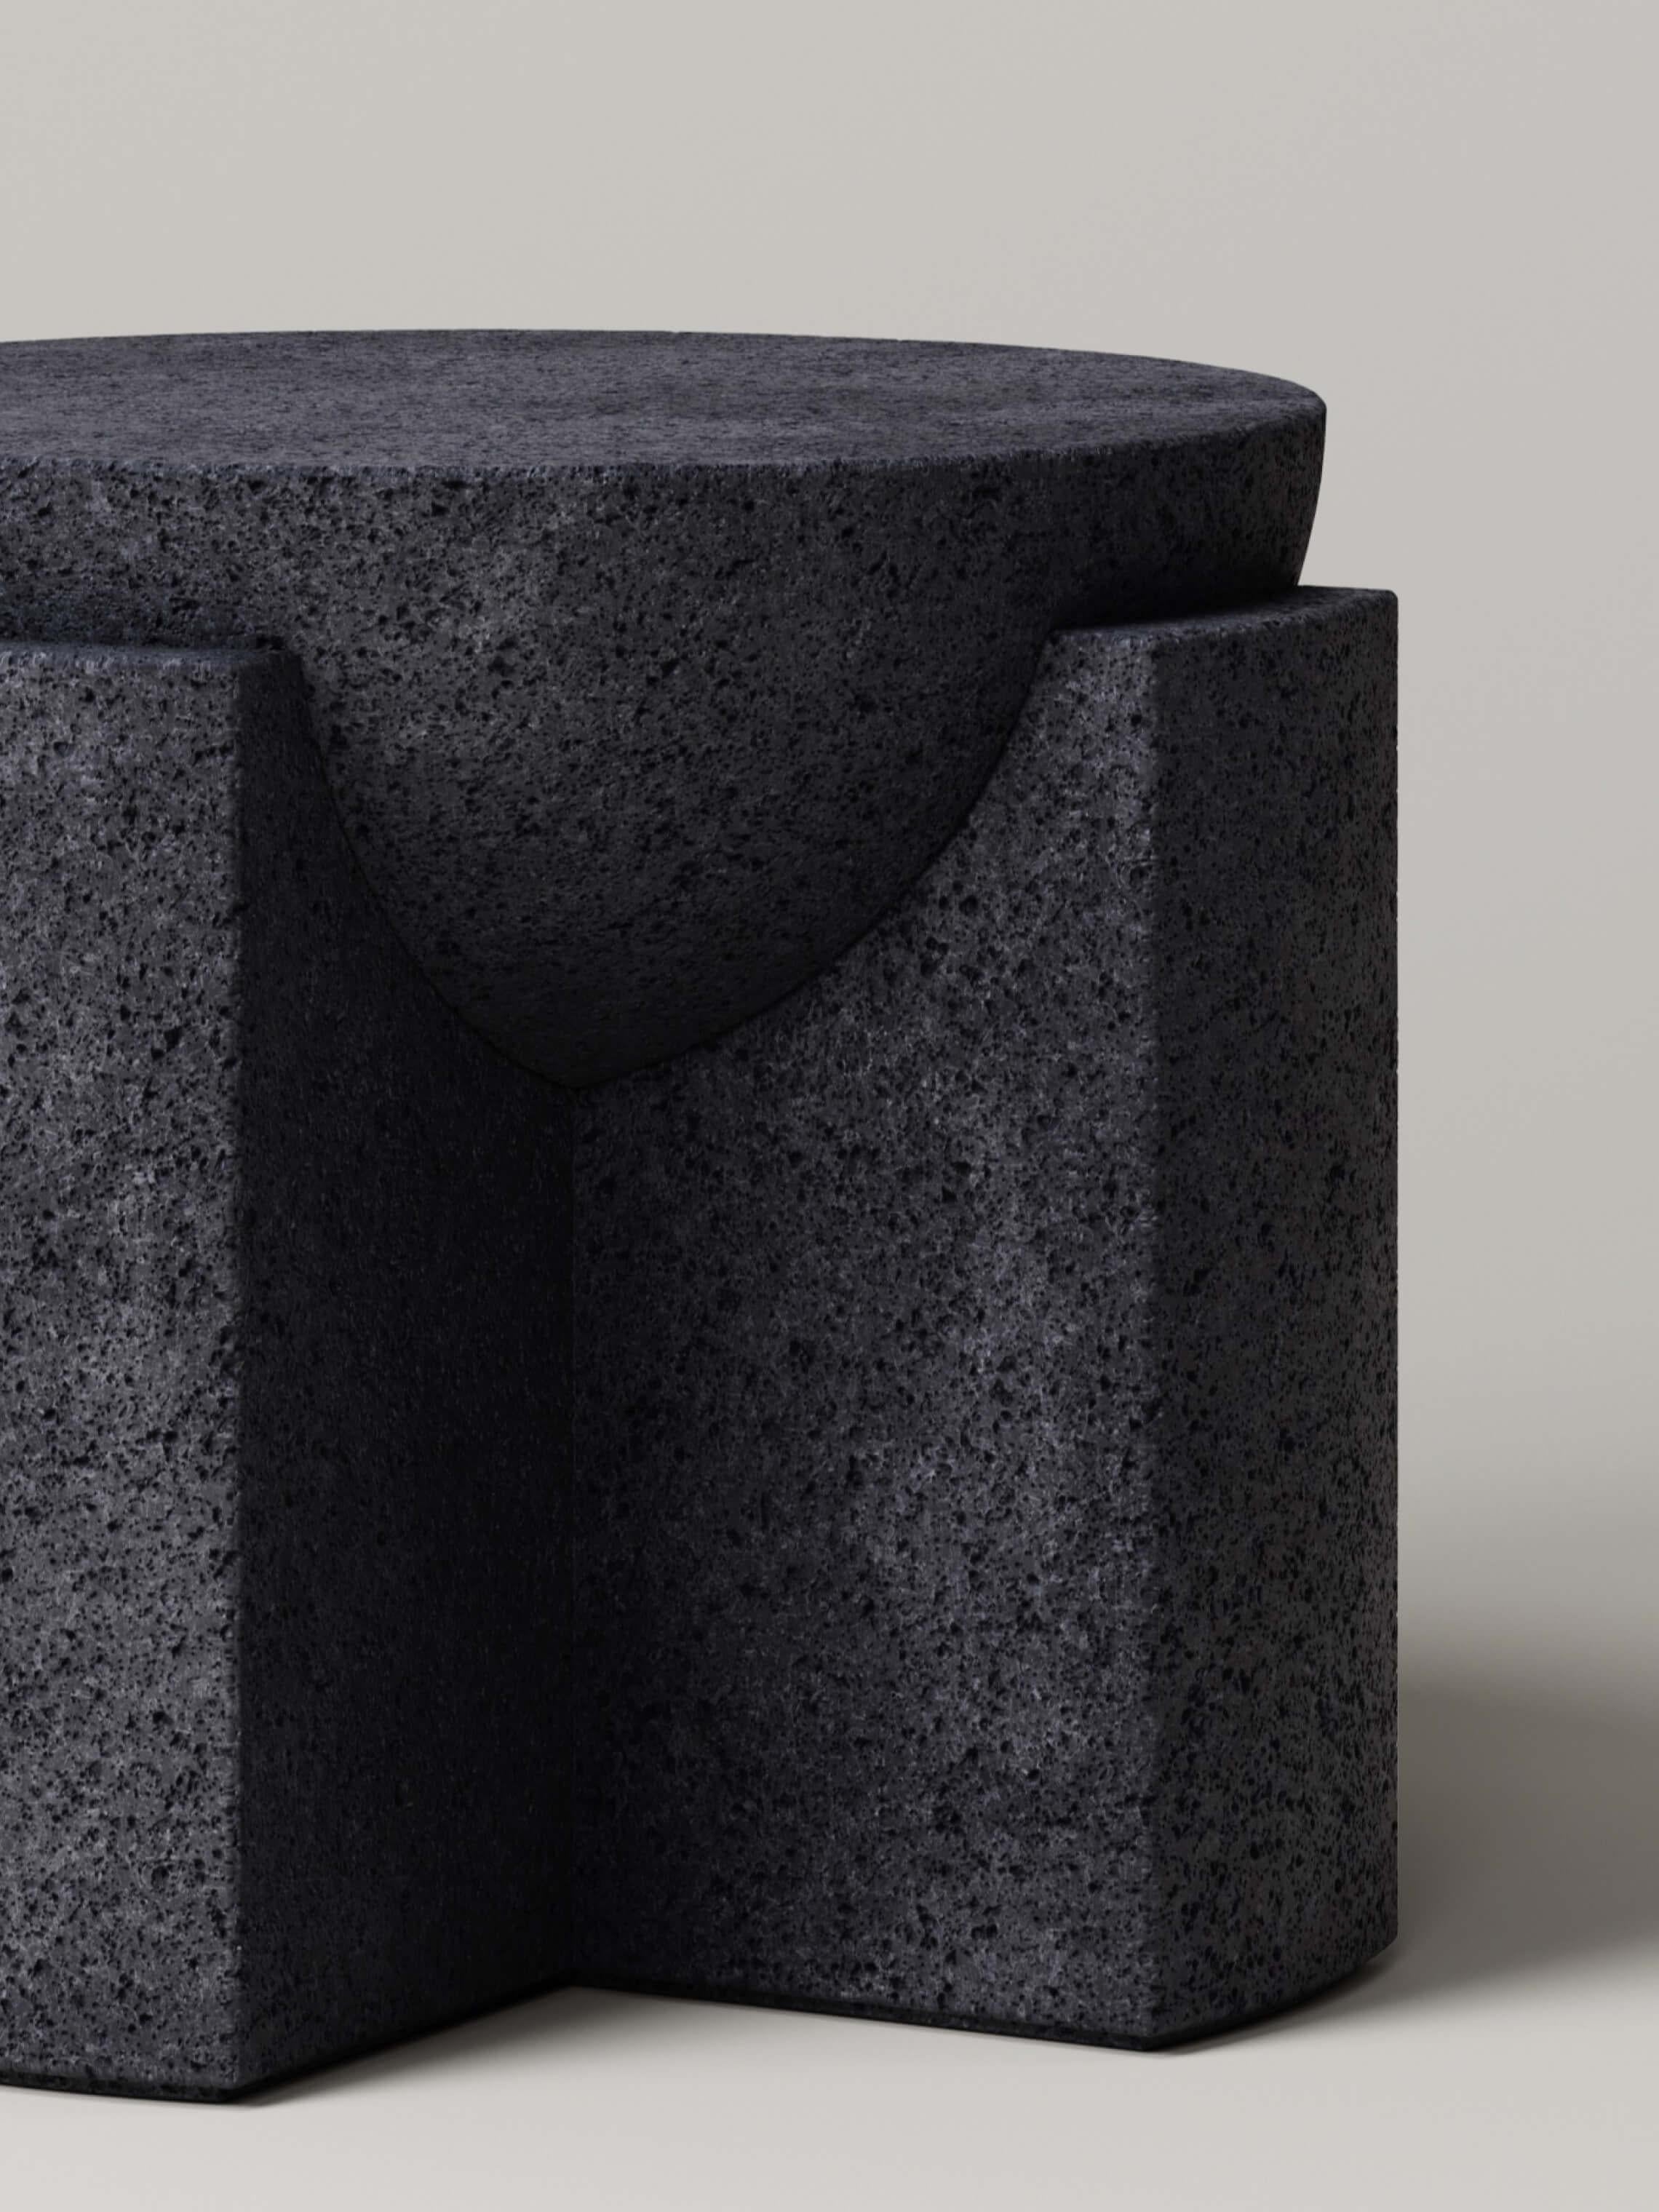 Mexican M_002 Side Table designed by Studio Le Cann for Monolith Studio, Lava Rock For Sale